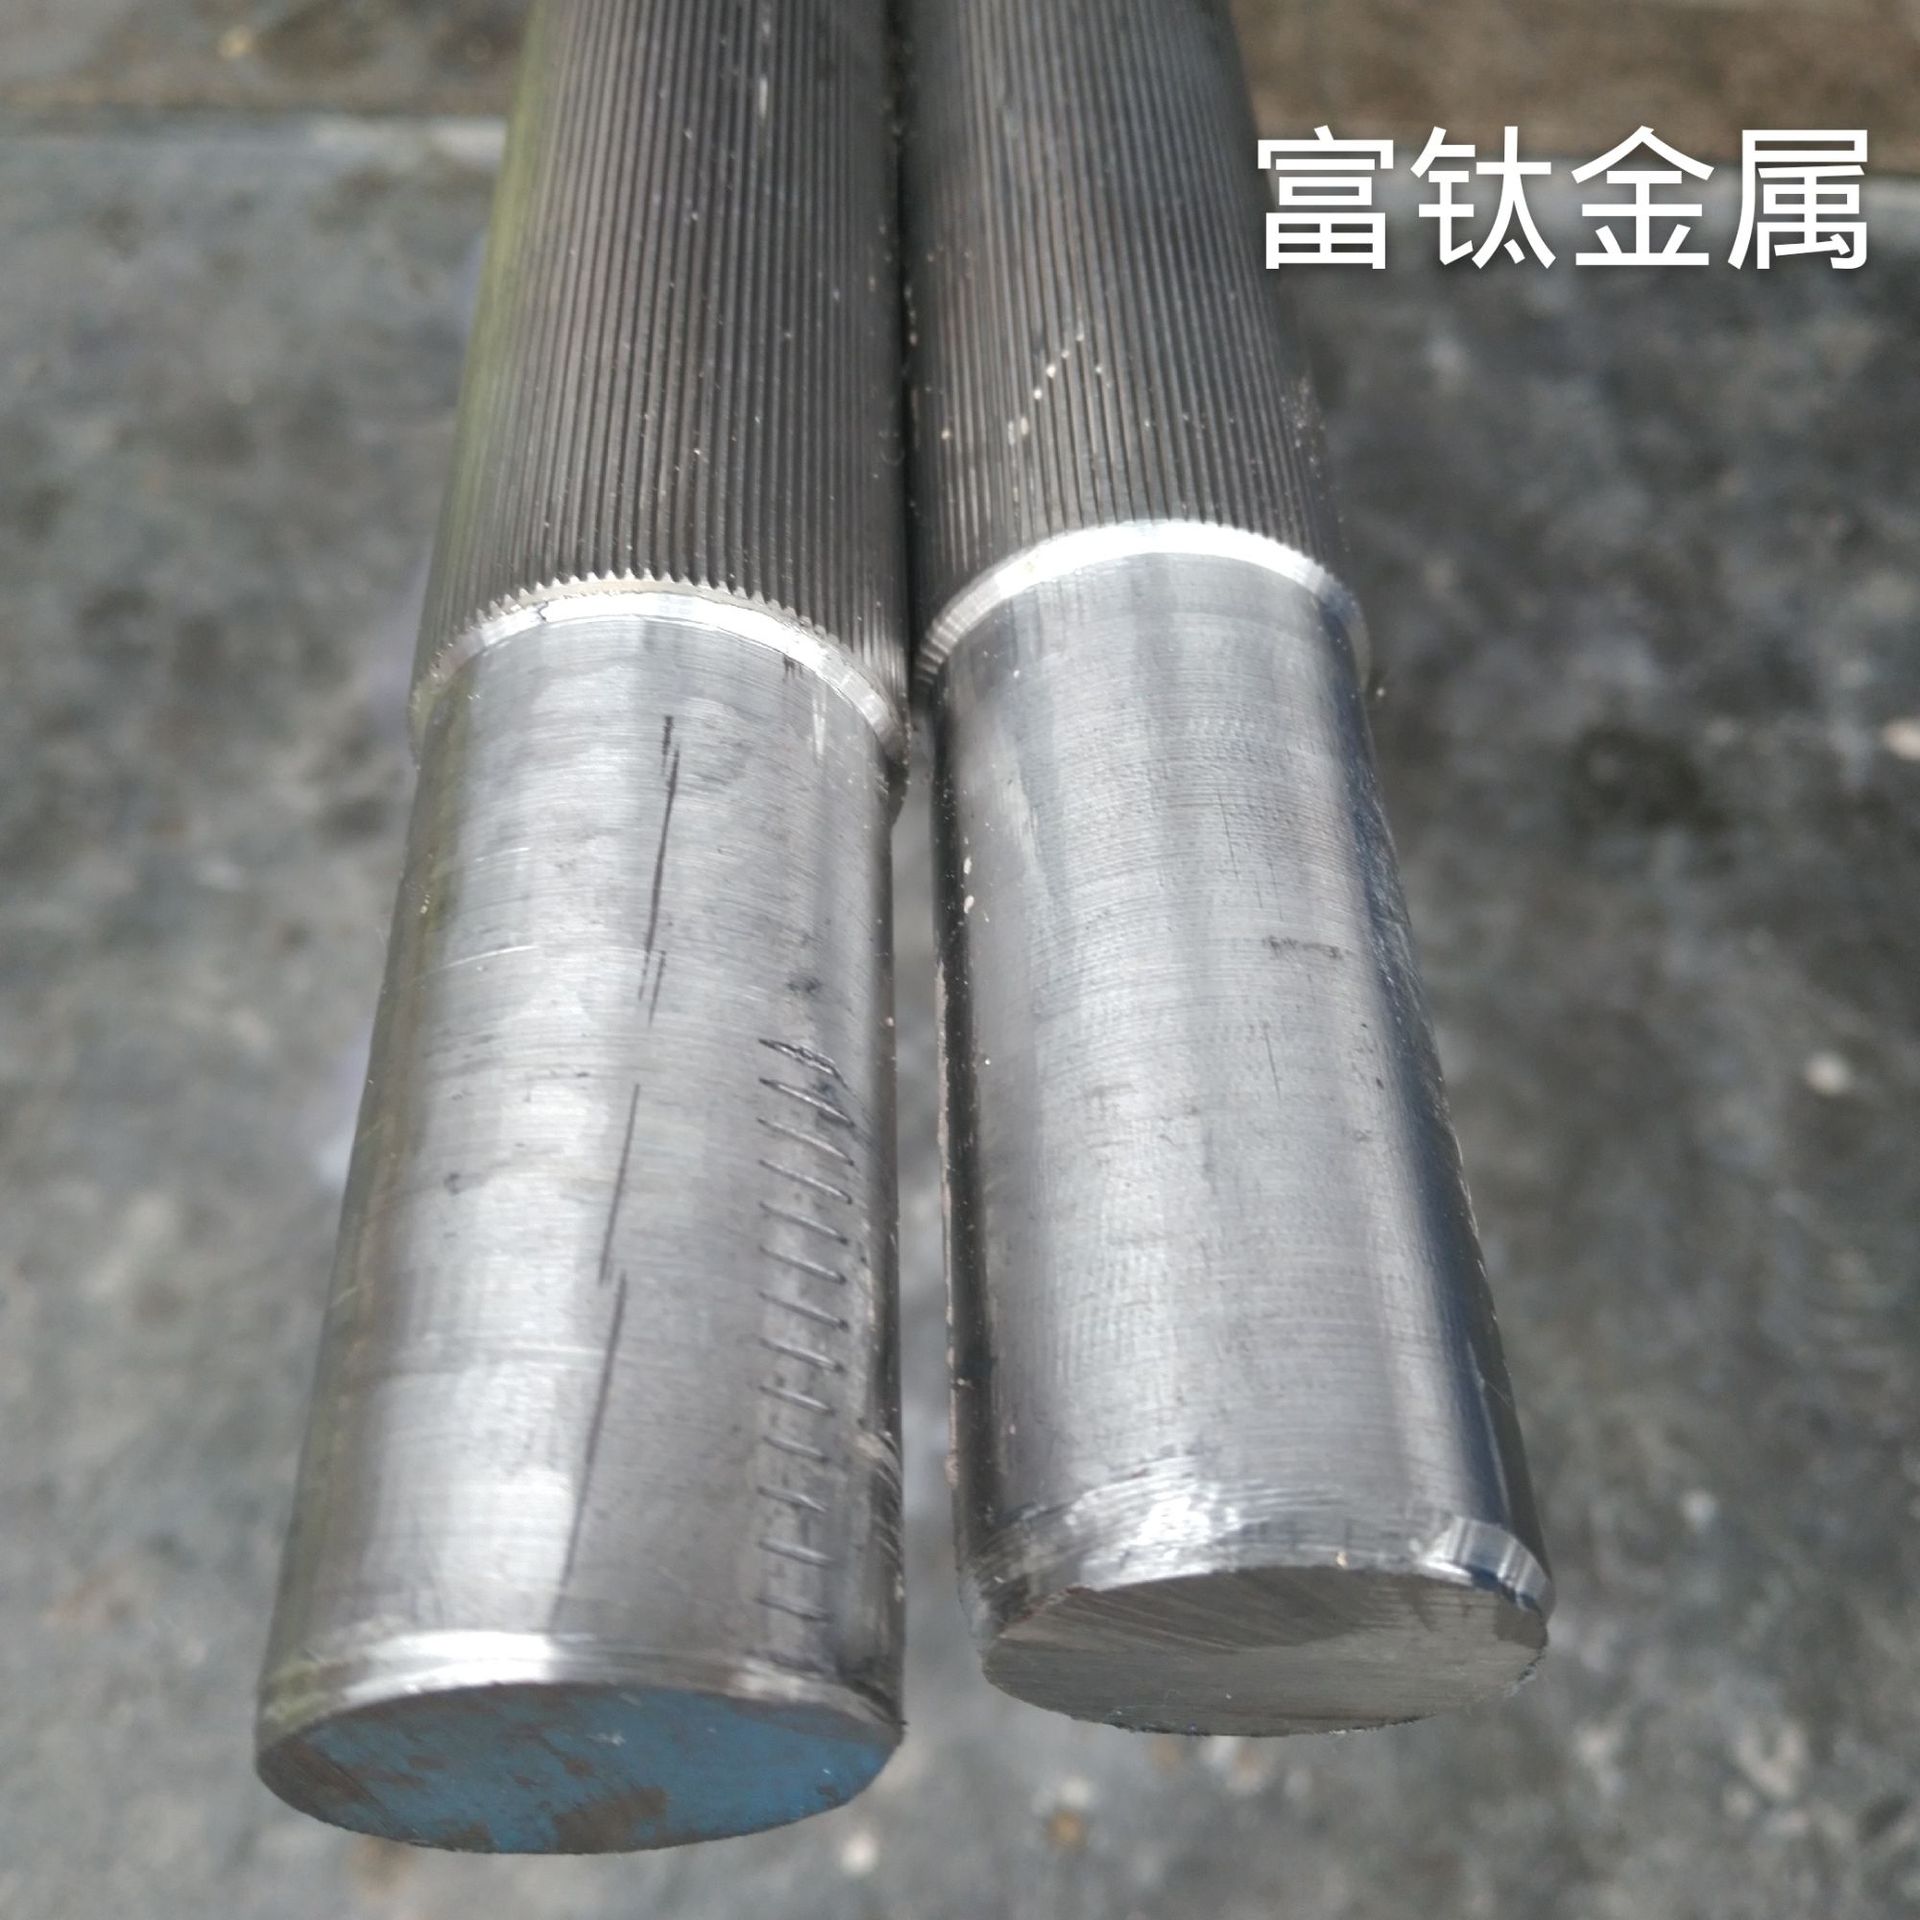 Stainless steel Ground rods 316 Stainless steel Flat steel Angle steel 136 Iron bars Ruled Steel bars Manufactor wholesale